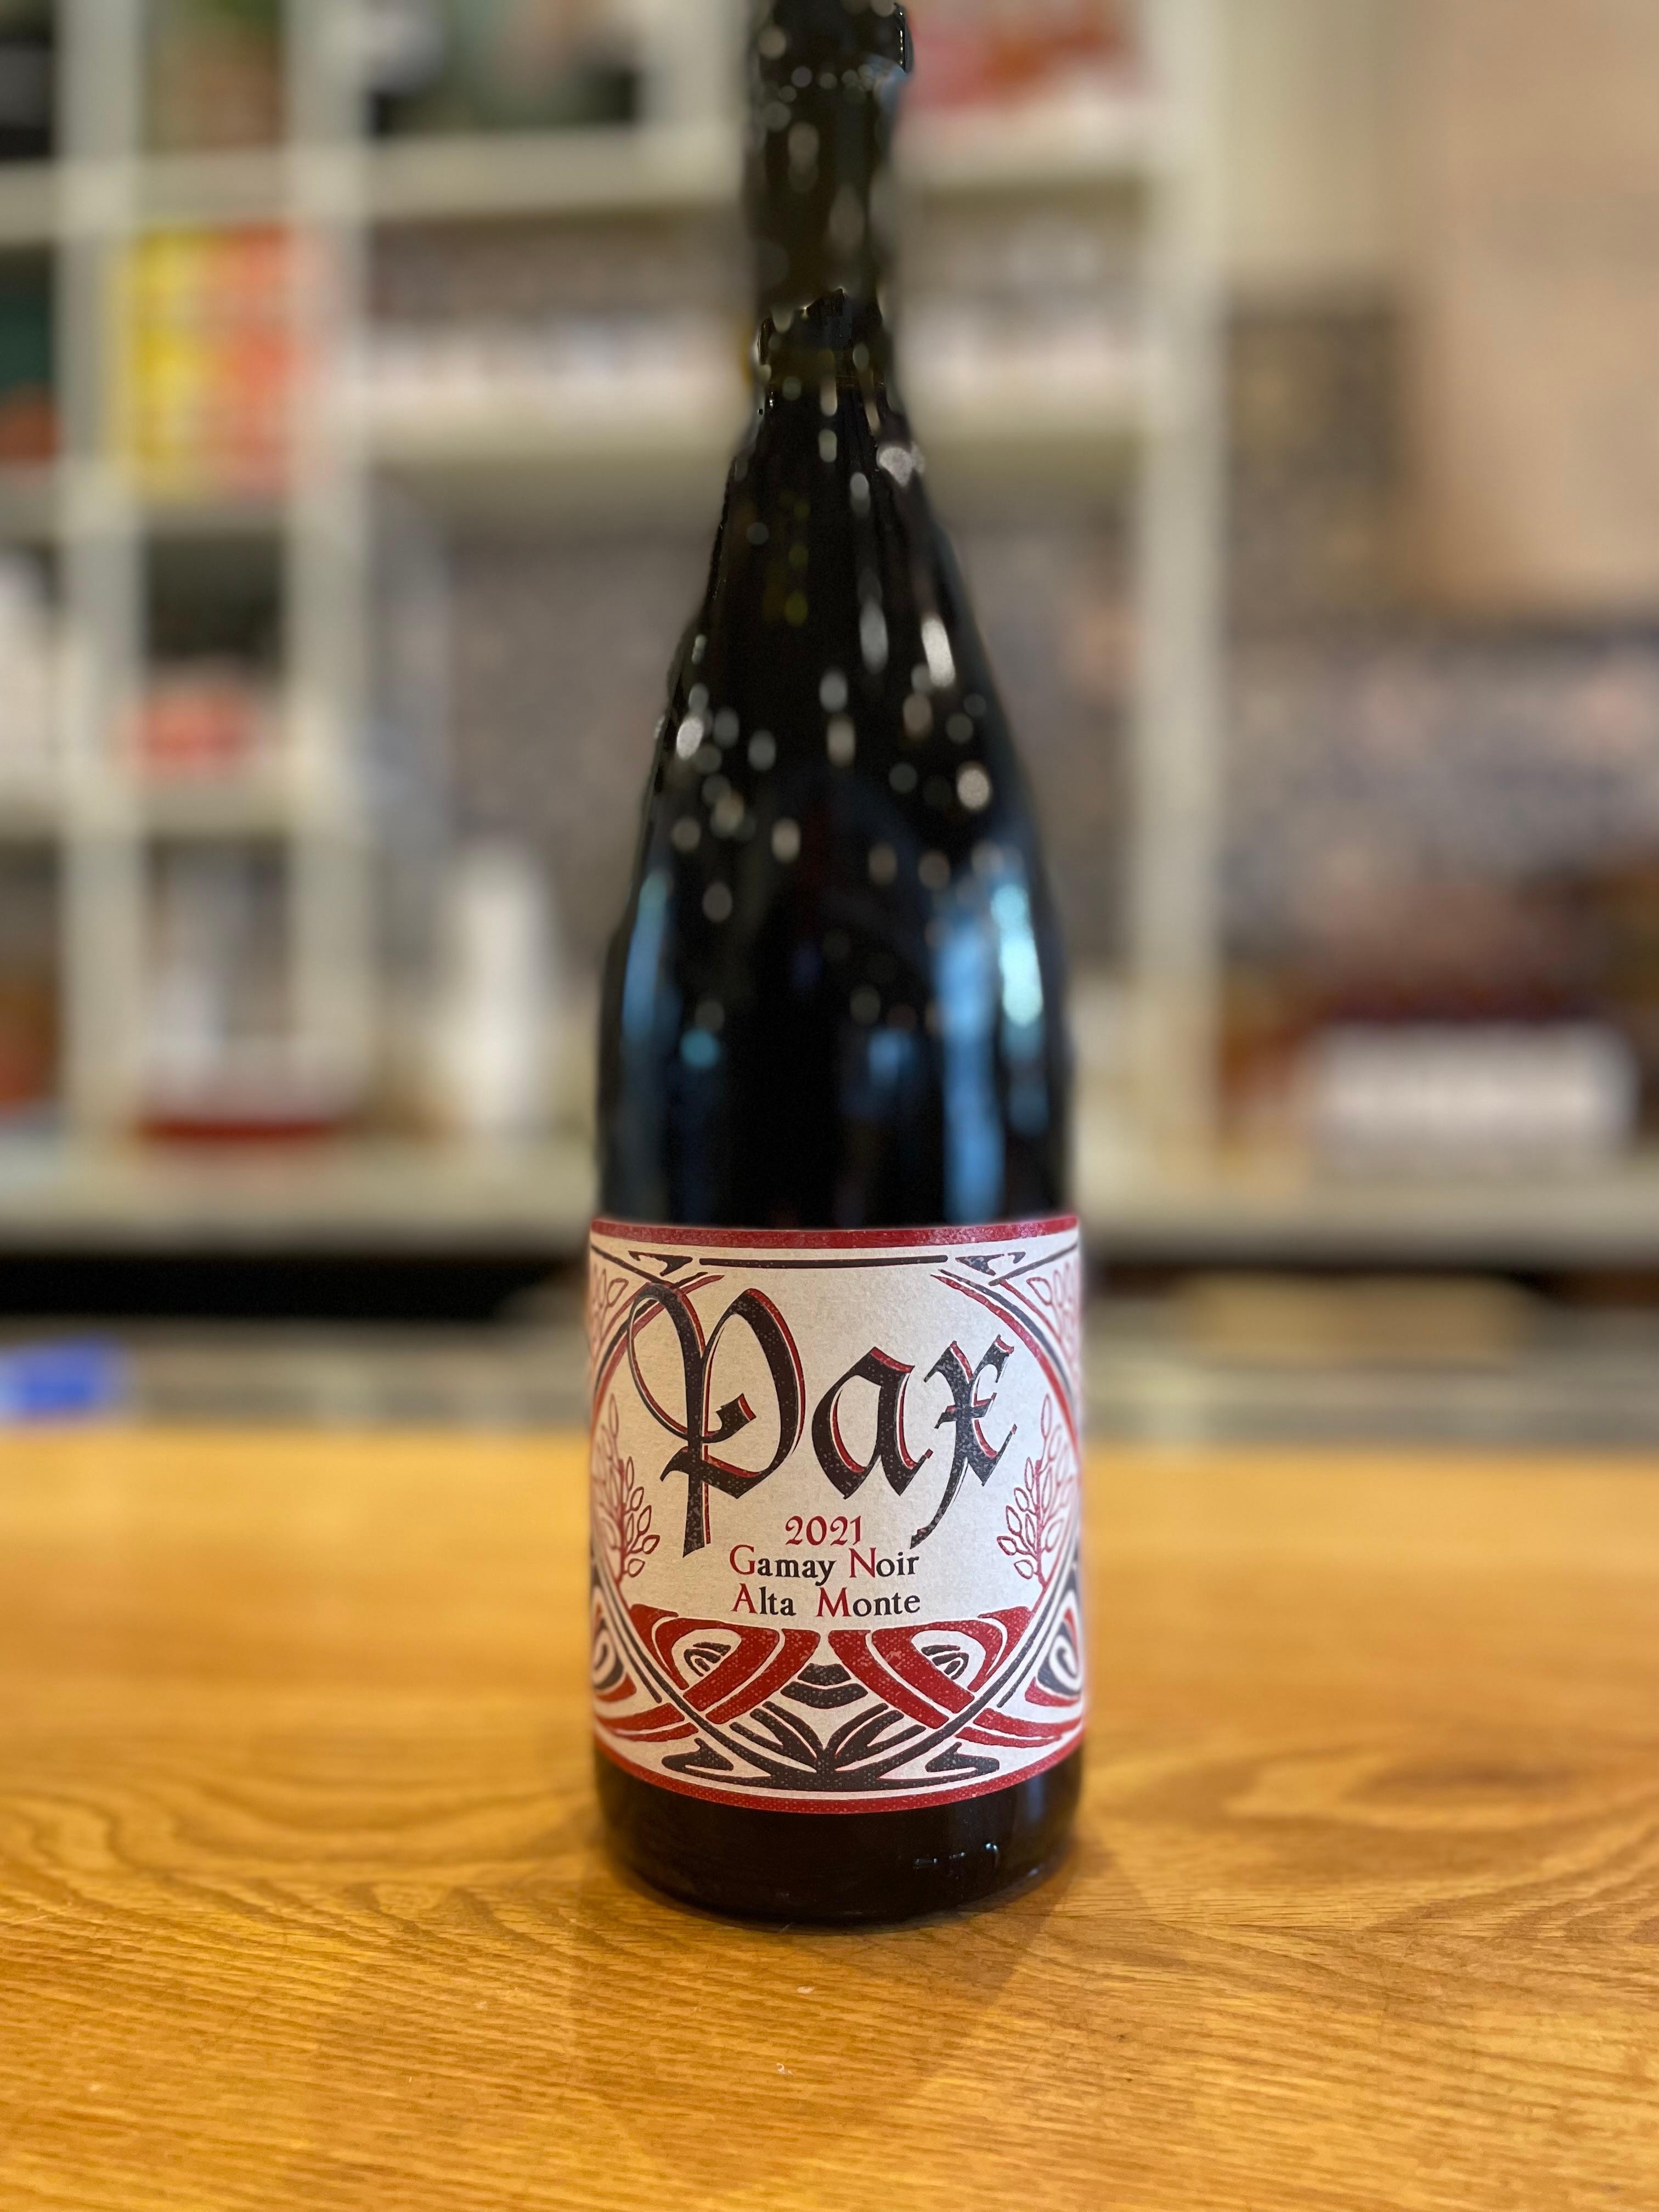 Pax Mahle Wines 'Gamay Noir' 2021